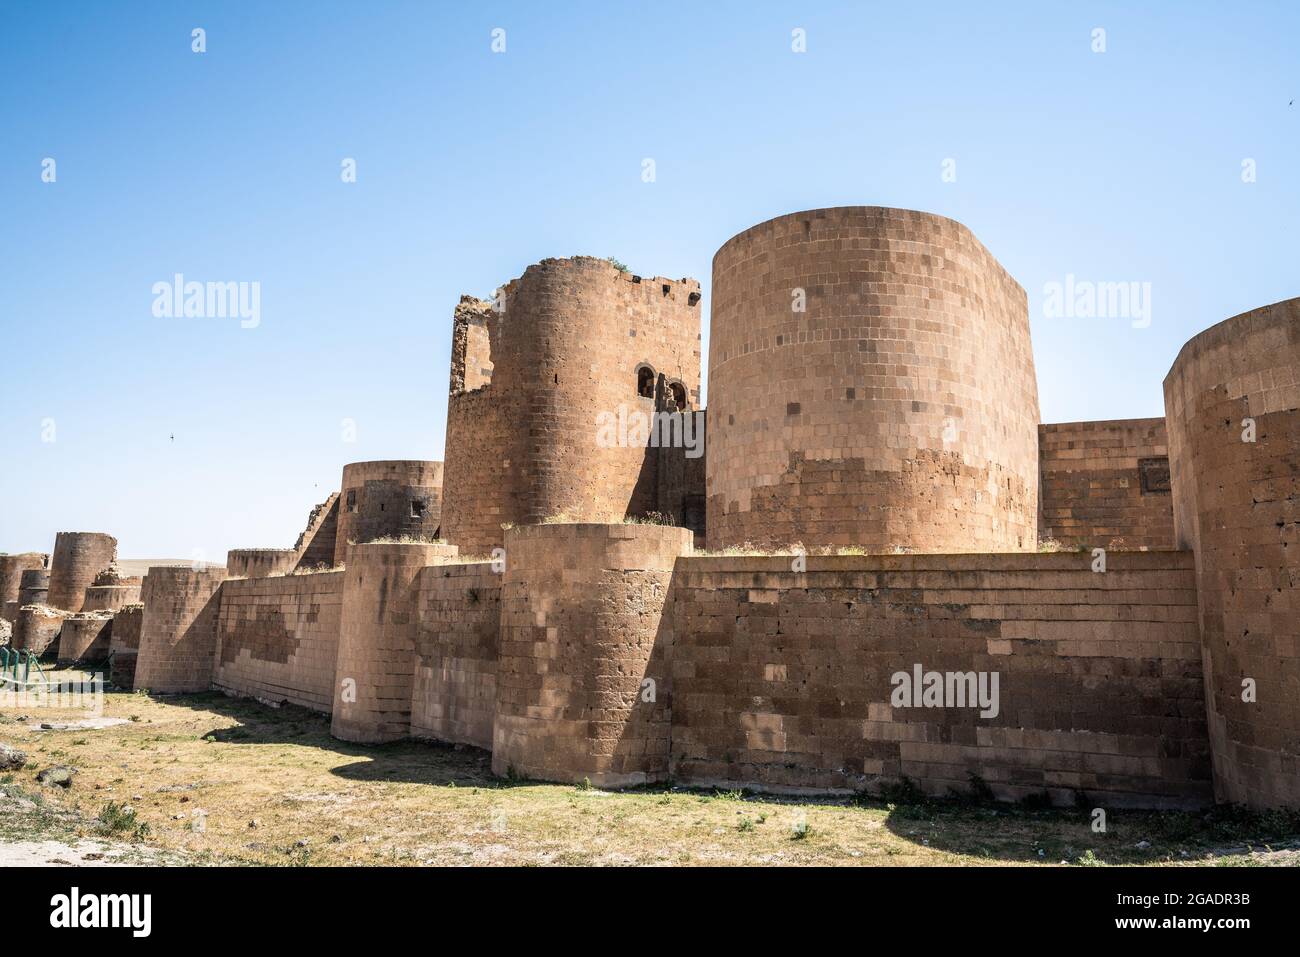 Ani city and fortification ruins historical ancient ruins of an antique city in Kars, Turkey. High quality photo Stock Photo